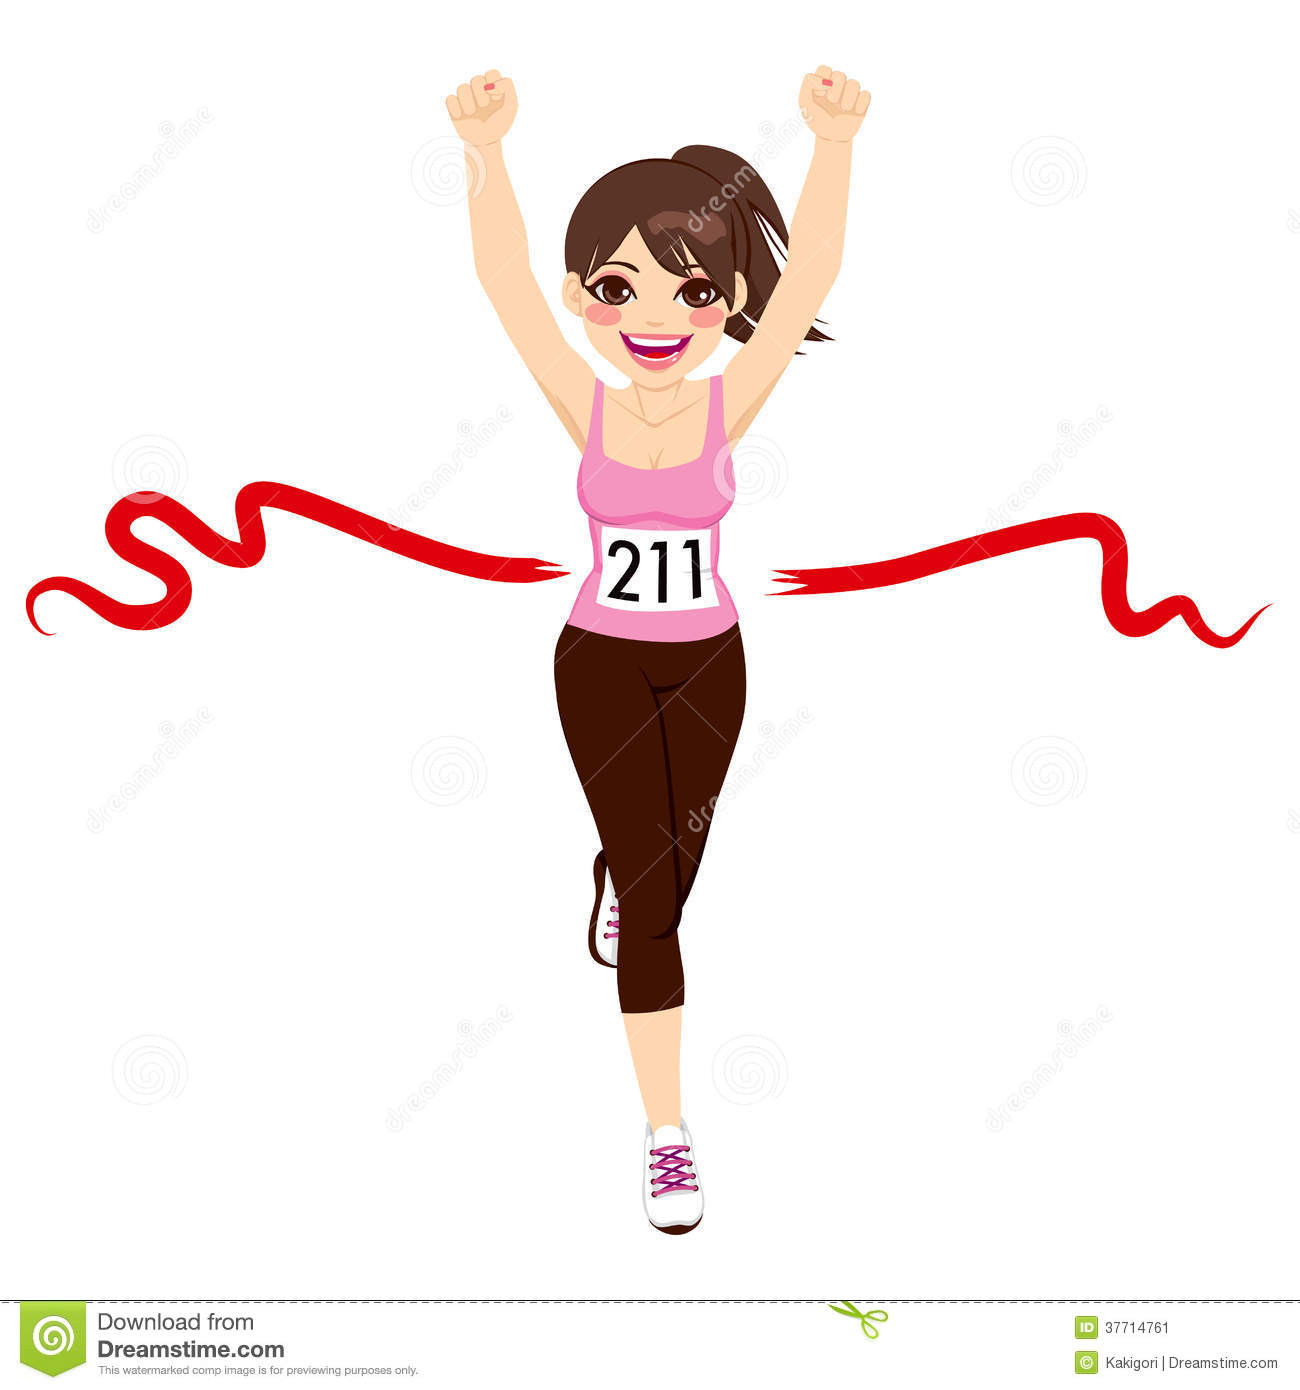 Crossing The Finish Line Disney Clipart.